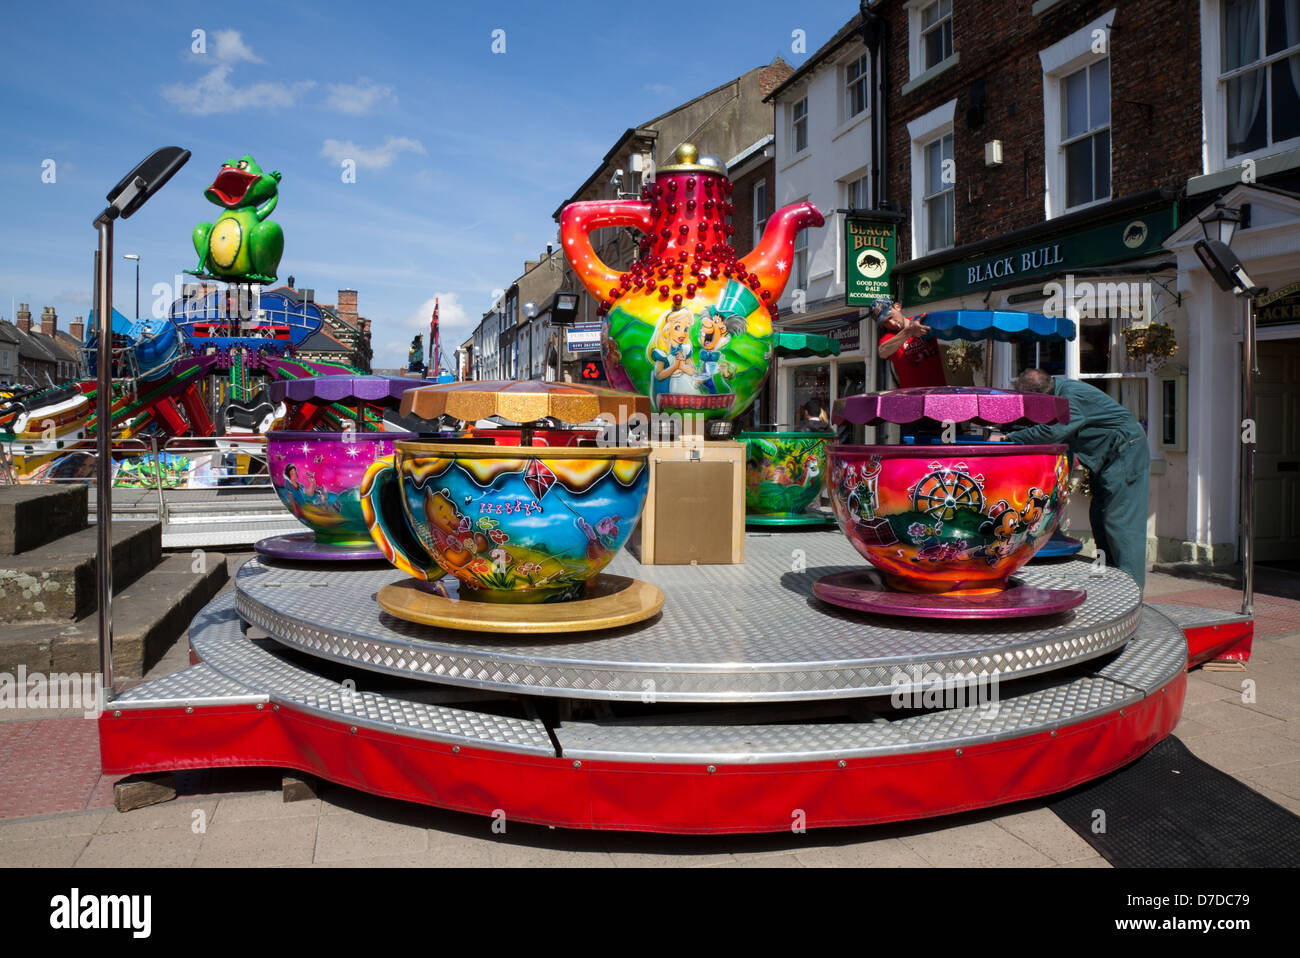 Amusements, Carousel Fun-Fair rides and fun attractions at the Northallerton Town Centre annual May Street Fair, High Street, North Yorkshire, UK Stock Photo